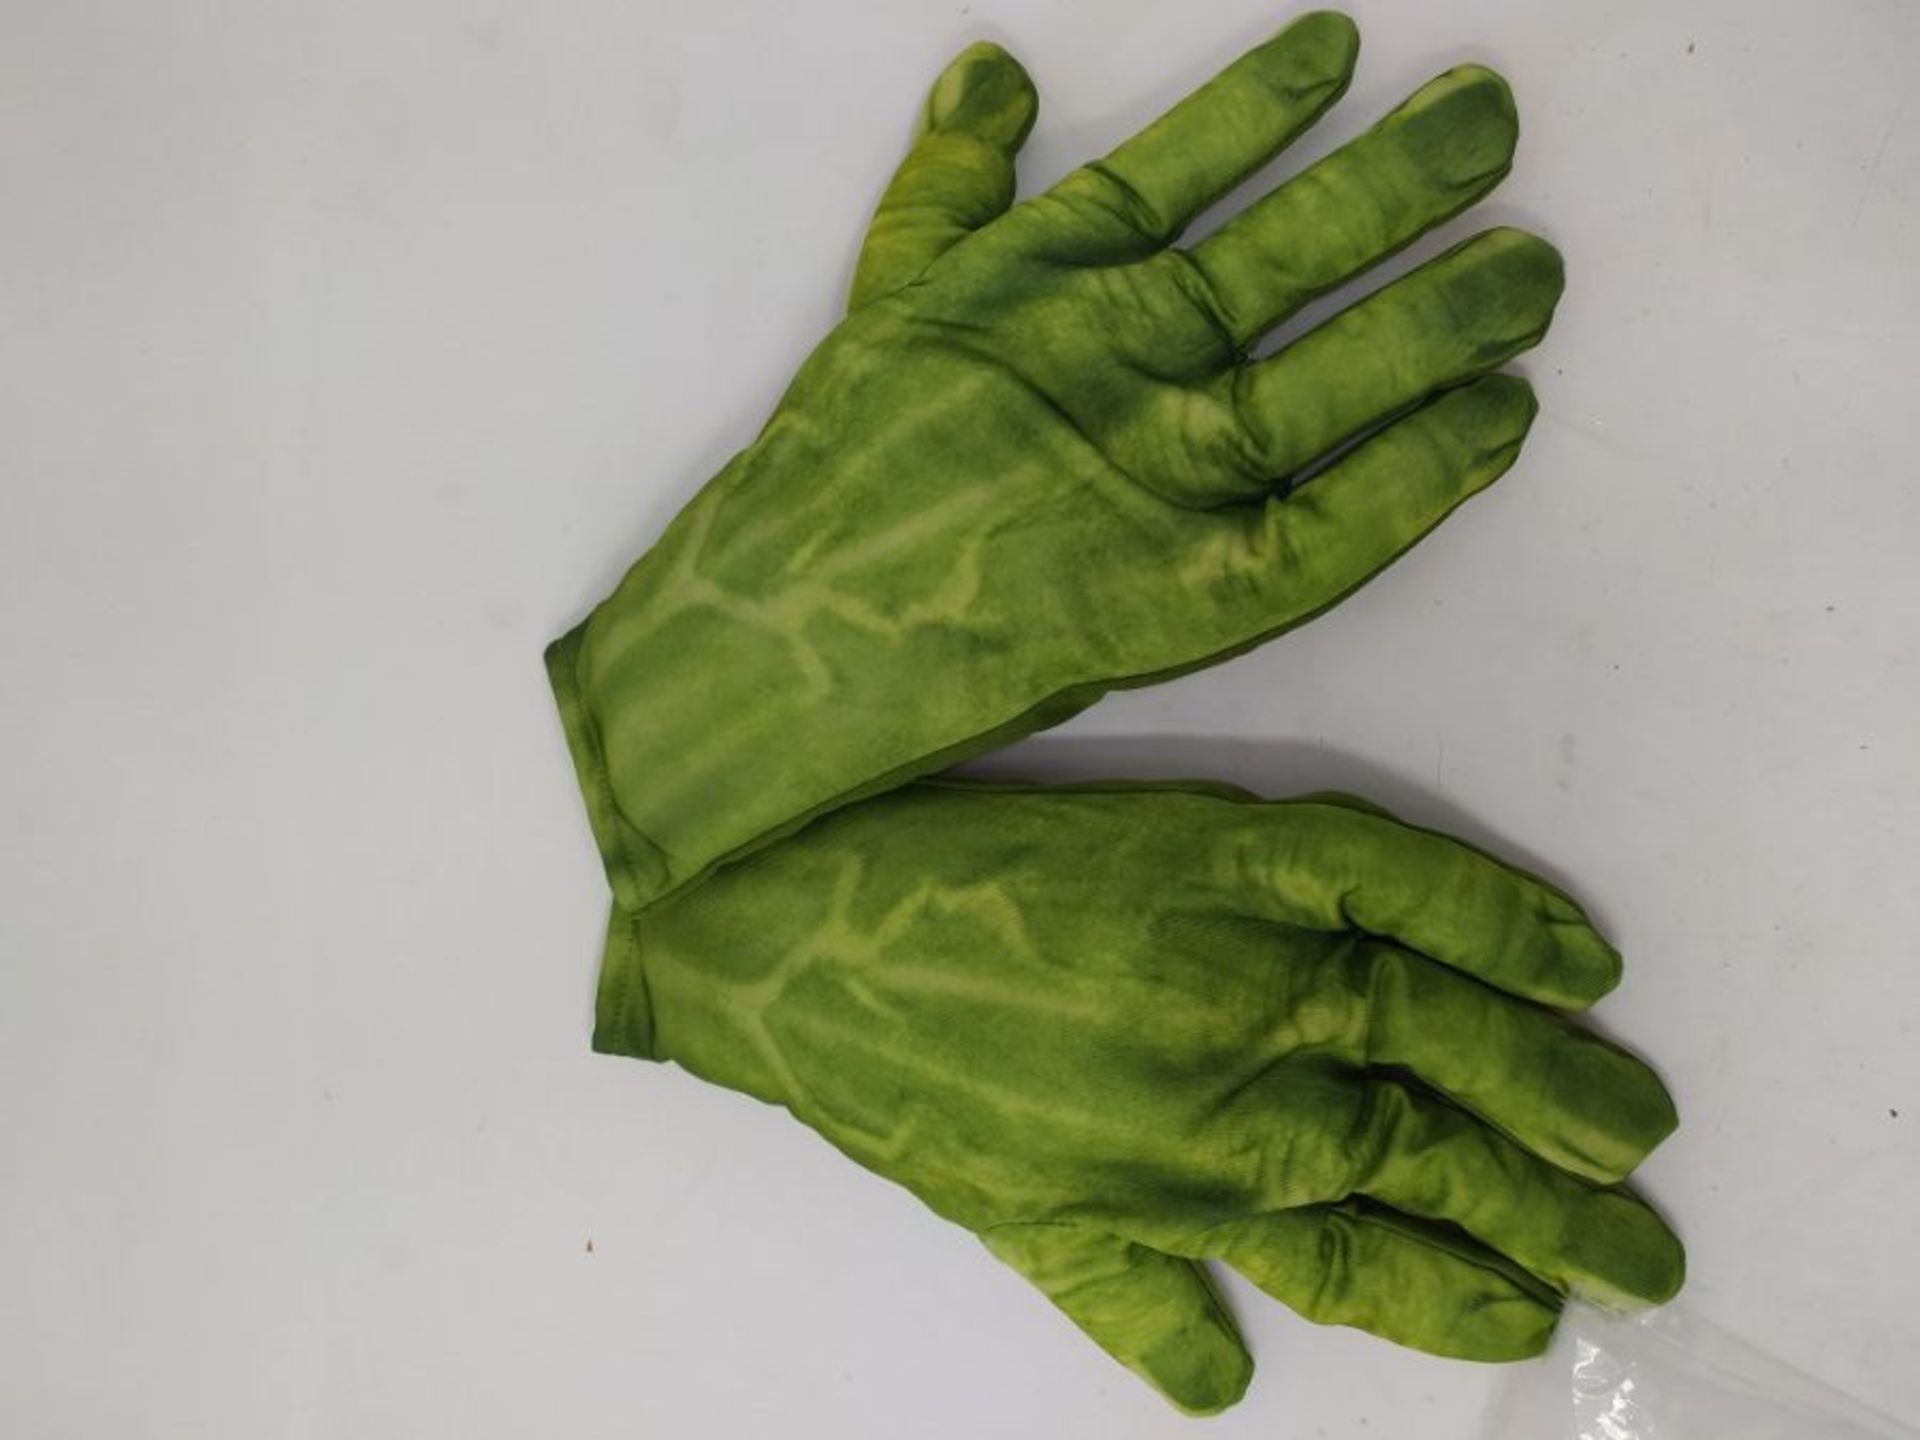 Rubie's 36348_NS Avengers 2 Age of Ultron Child's Hulk Gloves Party Supplies, Hands